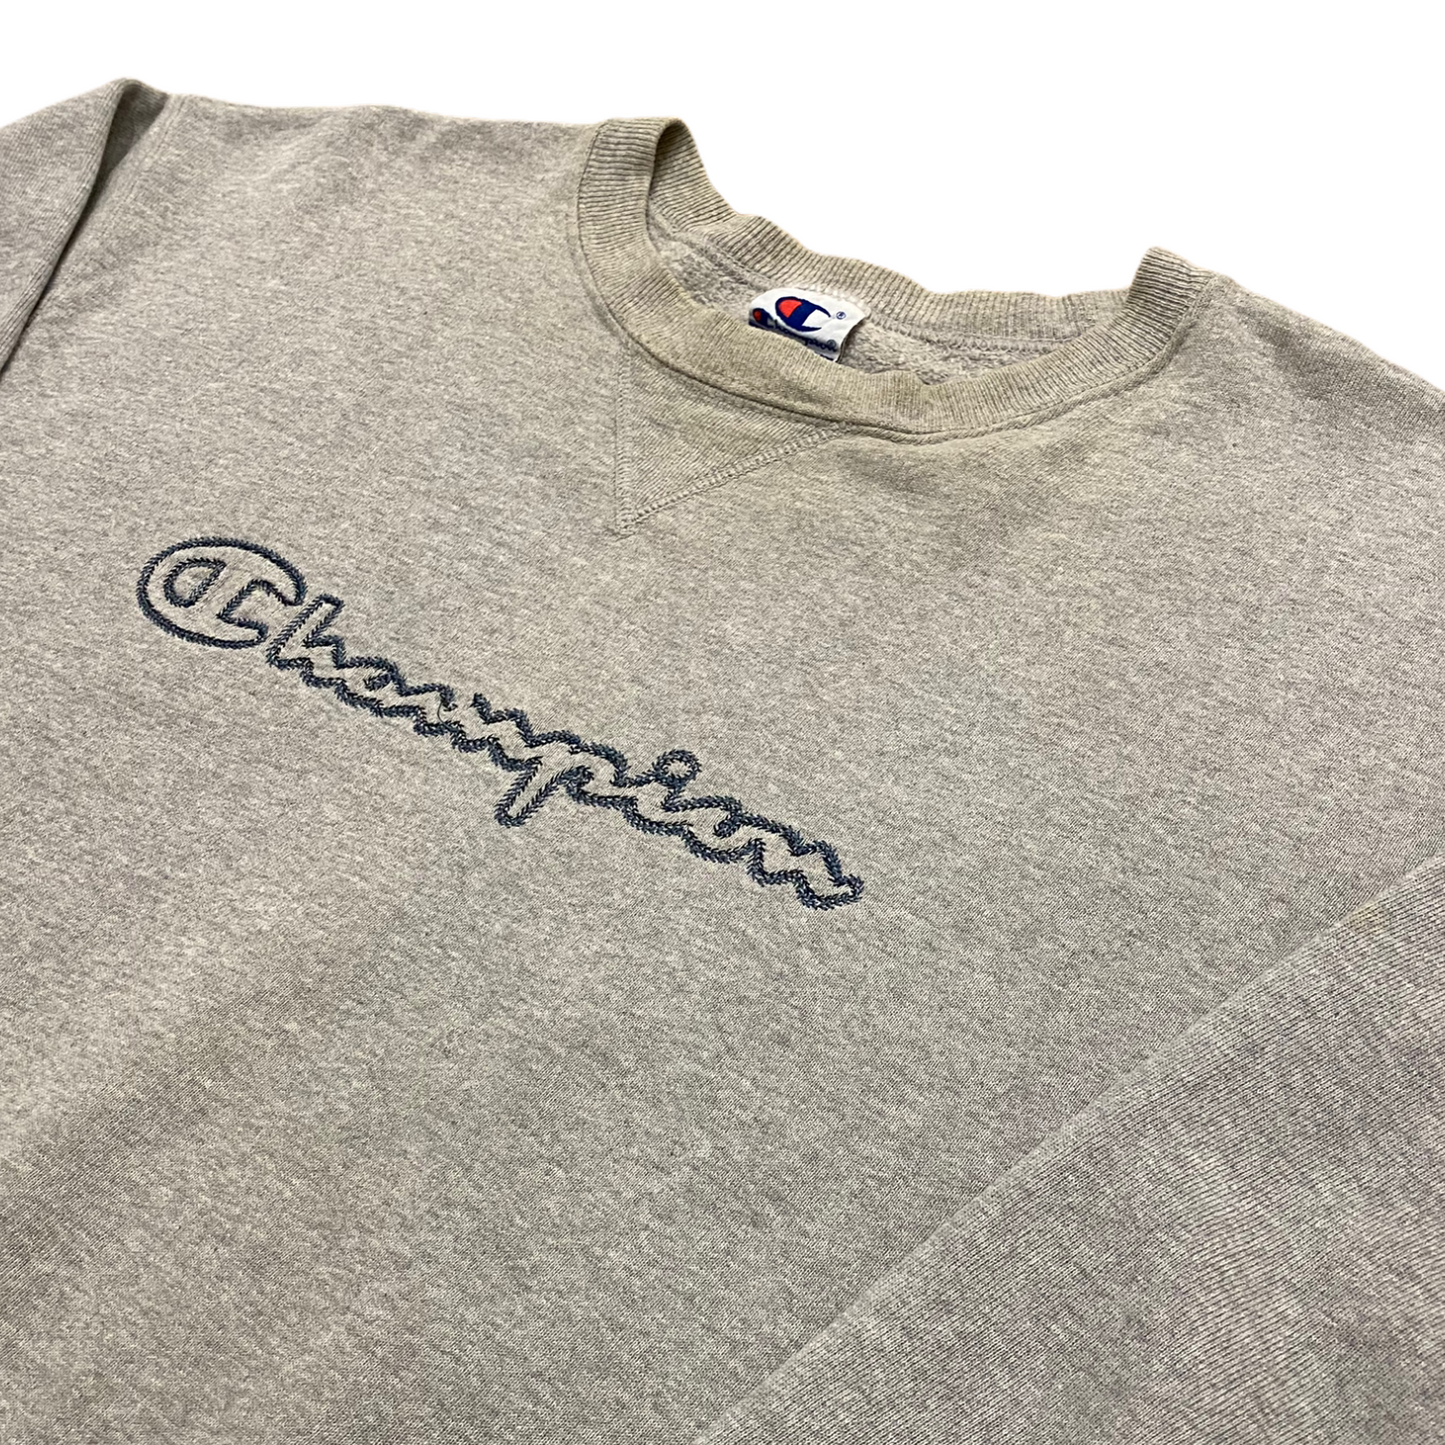 Champion embroidered sweater (M)